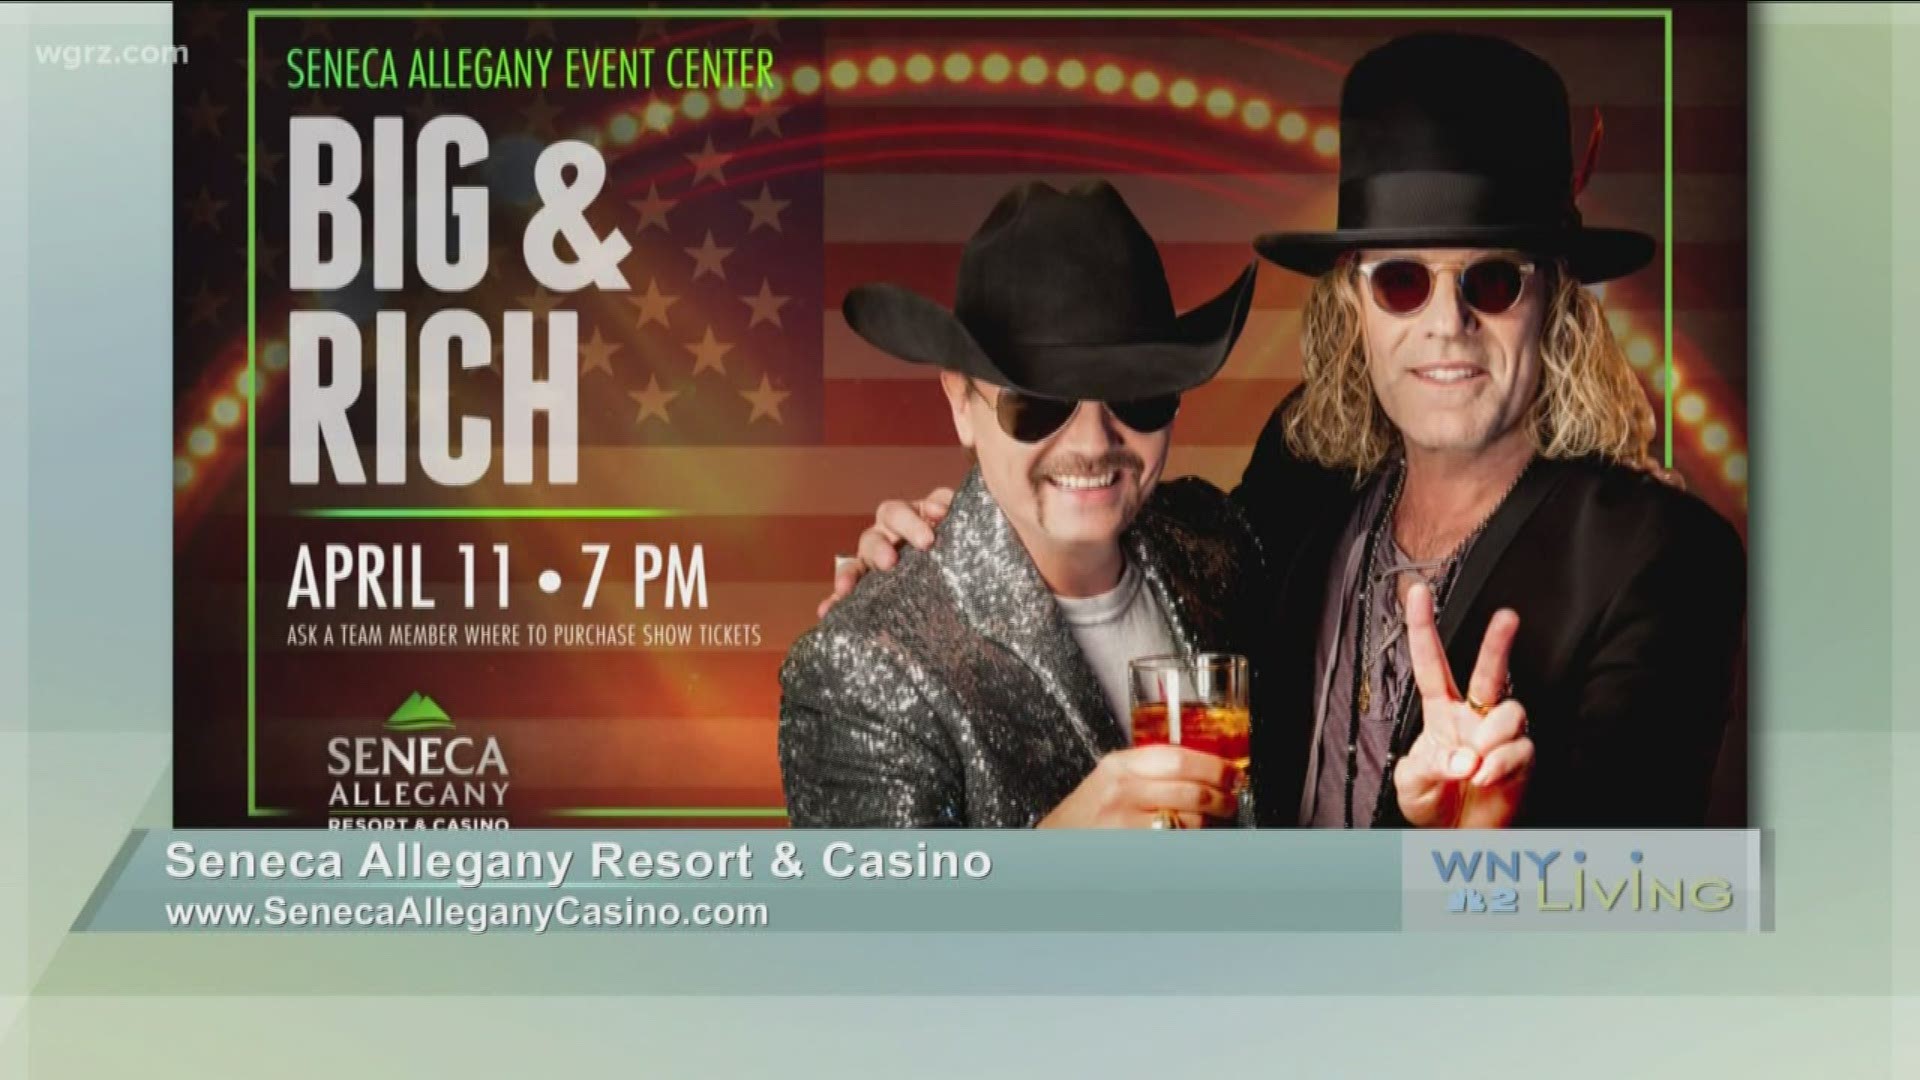 March 14 - Seneca Resorts and Casinos (THIS VIDEO IS SPONSORED BY SENECA RESORTS AND CASINOS)